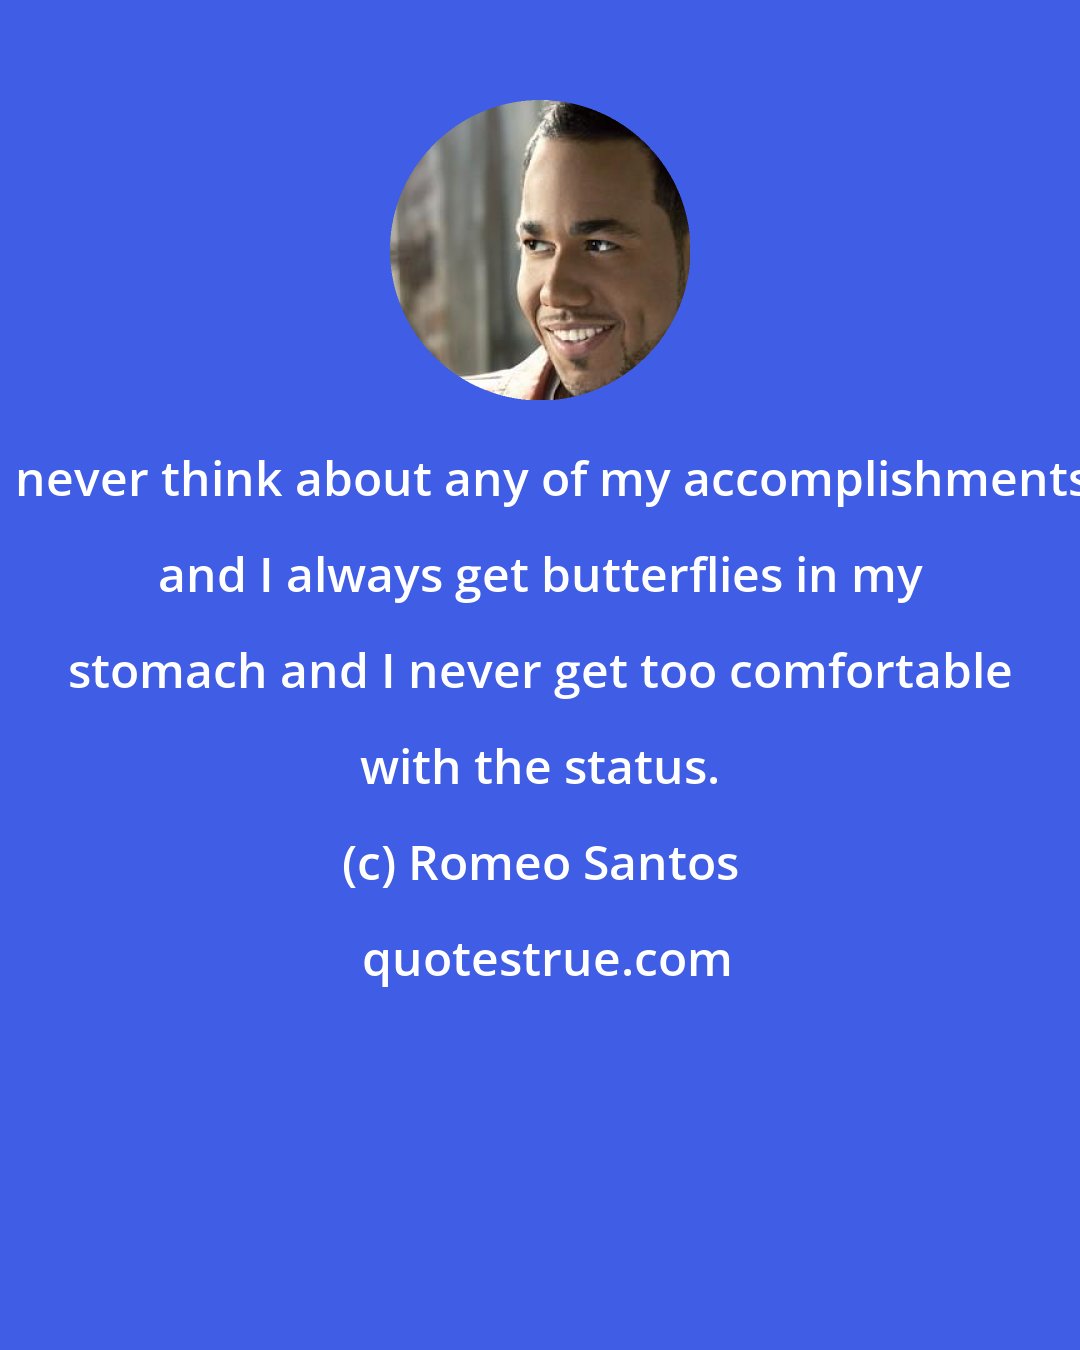 Romeo Santos: I never think about any of my accomplishments and I always get butterflies in my stomach and I never get too comfortable with the status.